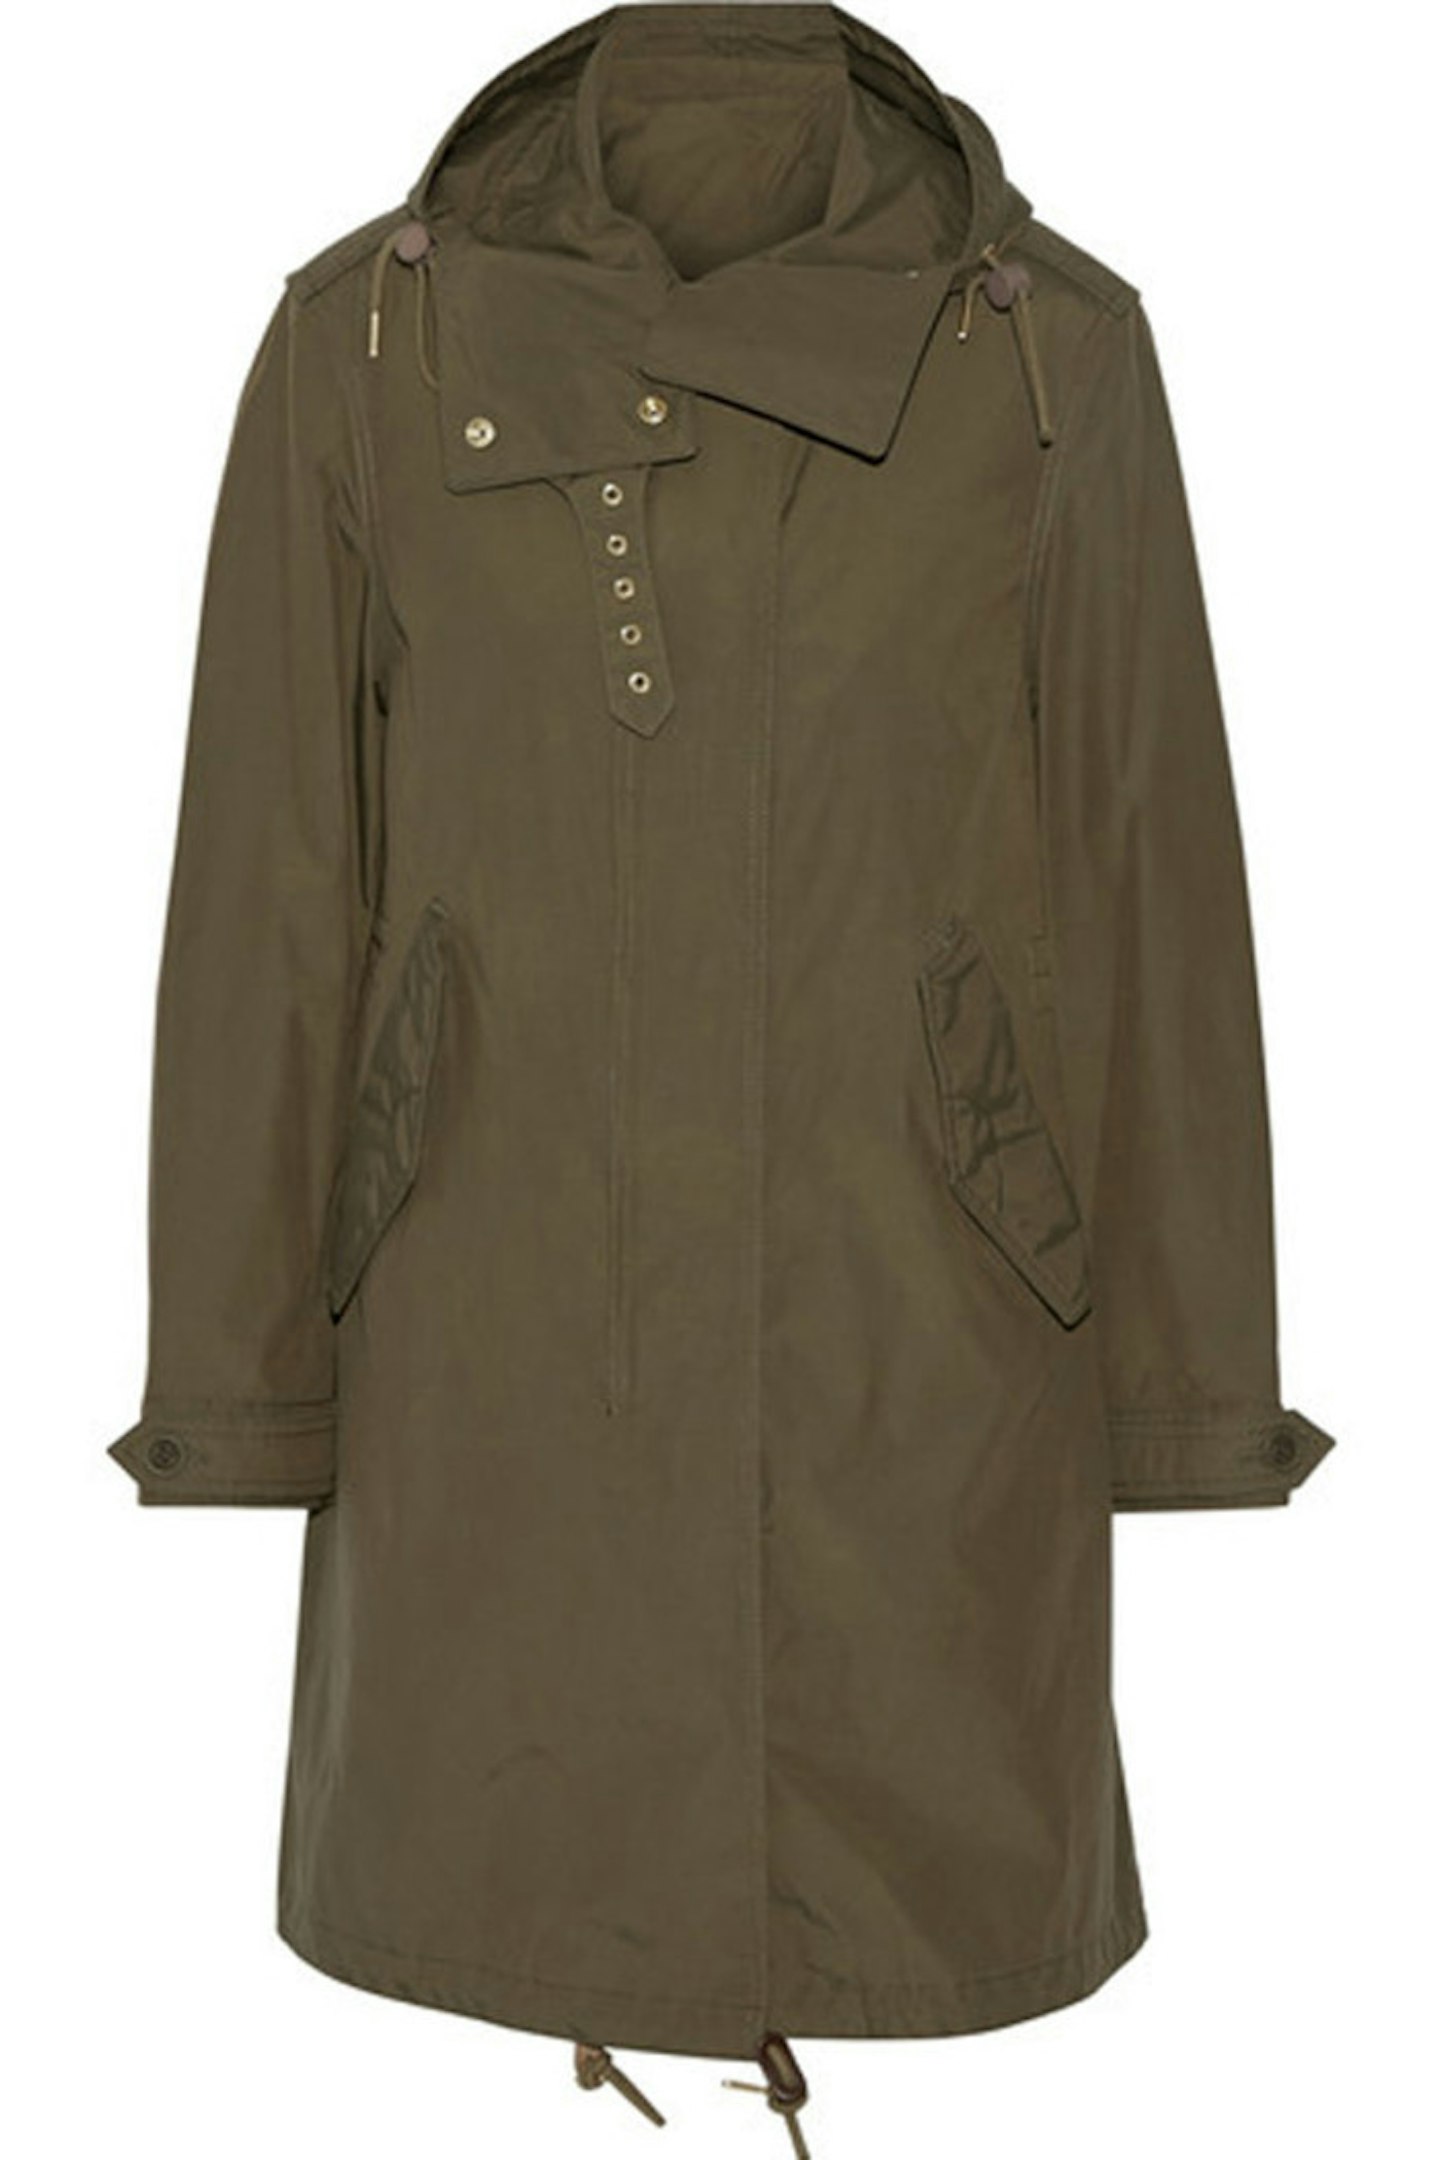 Burberry Brit Hooded Shell Coat